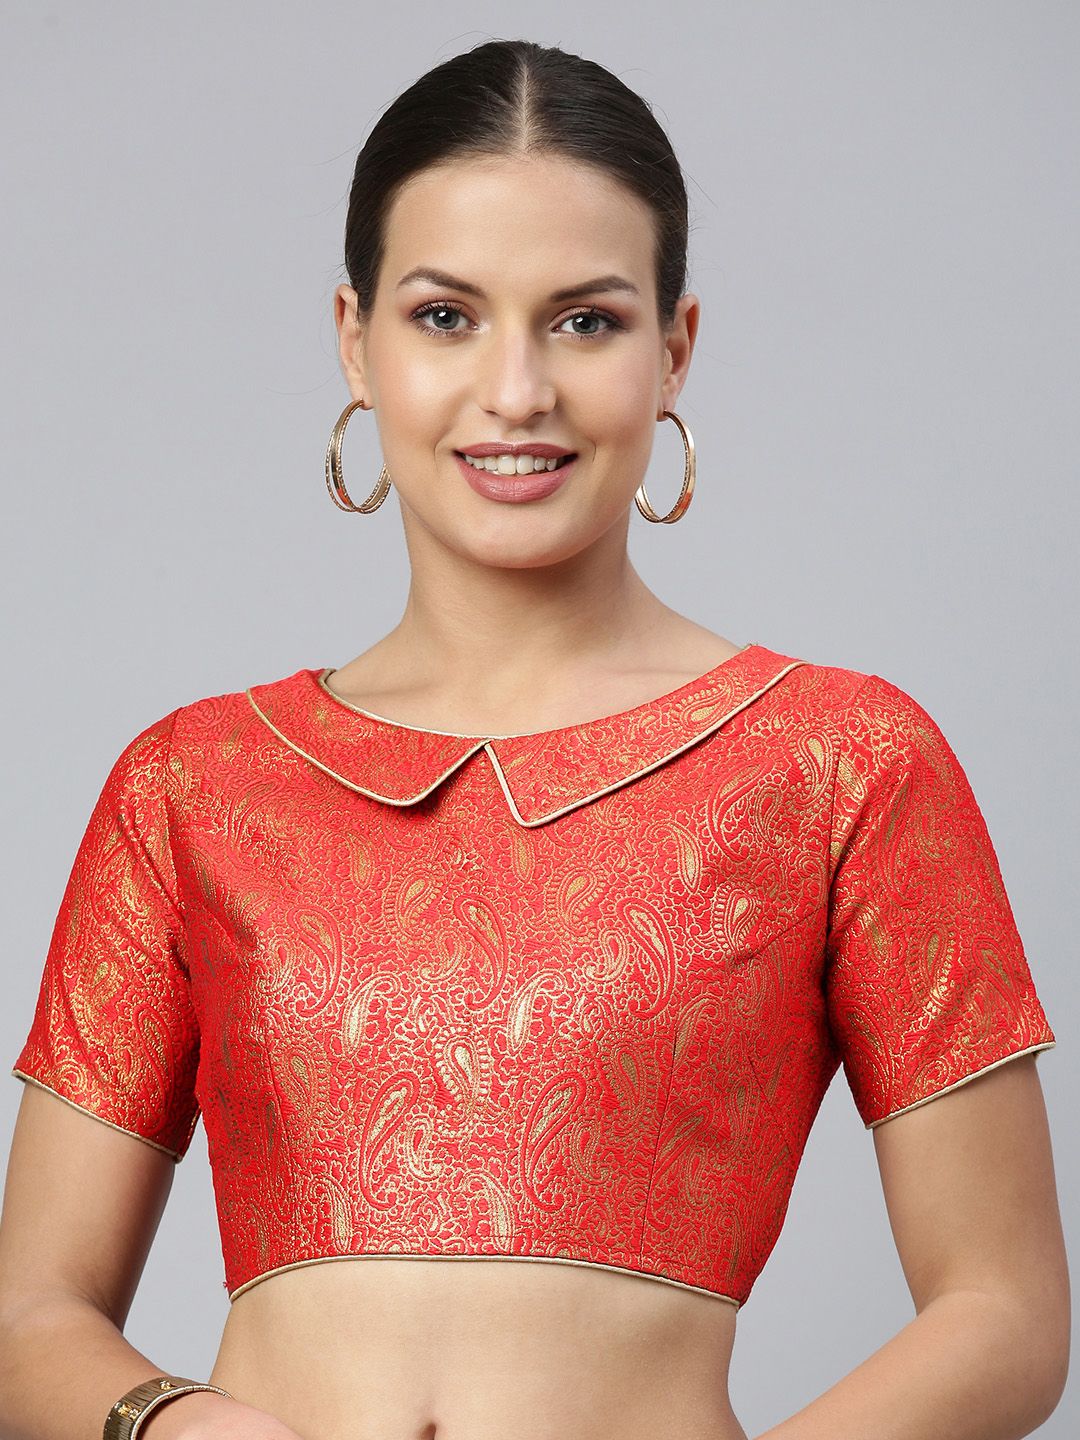 flaher Women Red & Gold Ethnic Motifs Jacquard Woven Design Saree Blouse with Cut-Out Price in India